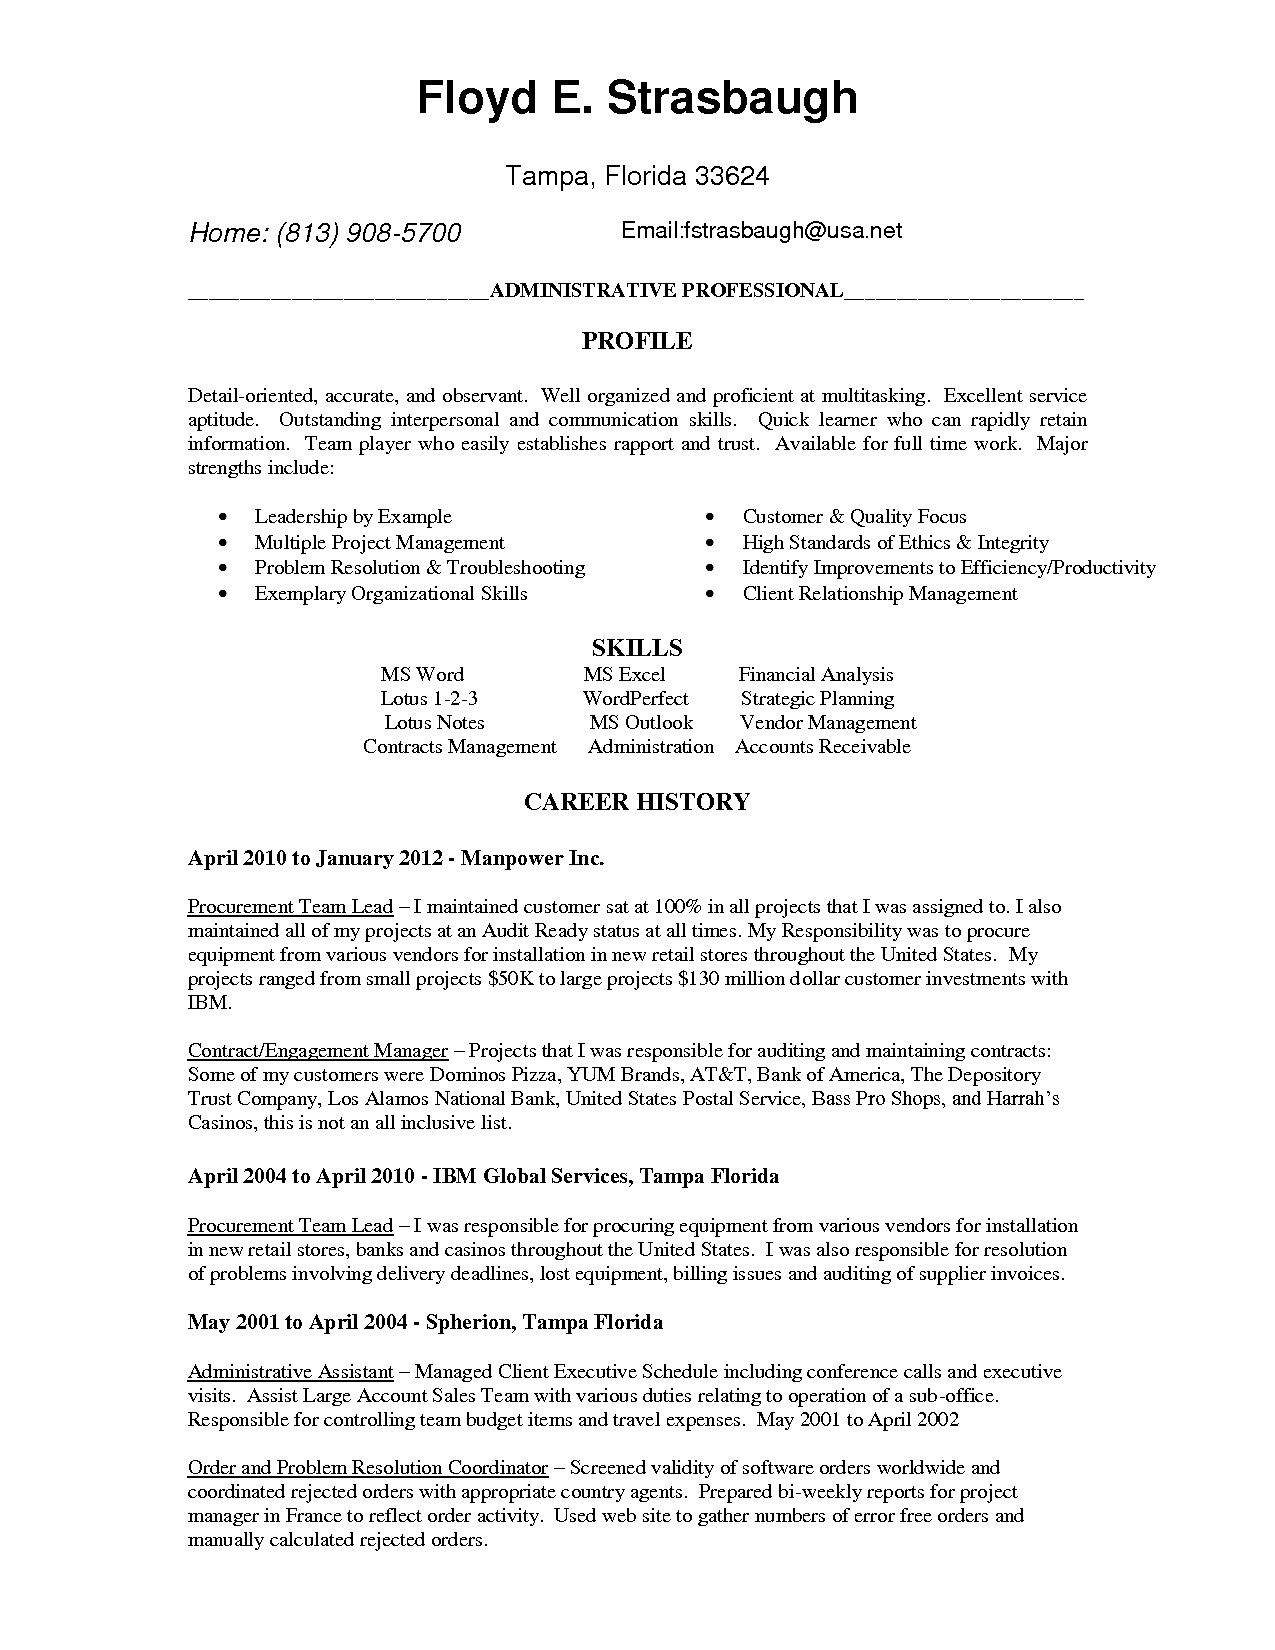 Executive Cover Letter Template - Executive Cover Letter Examples Luxury Executive Resume Templates